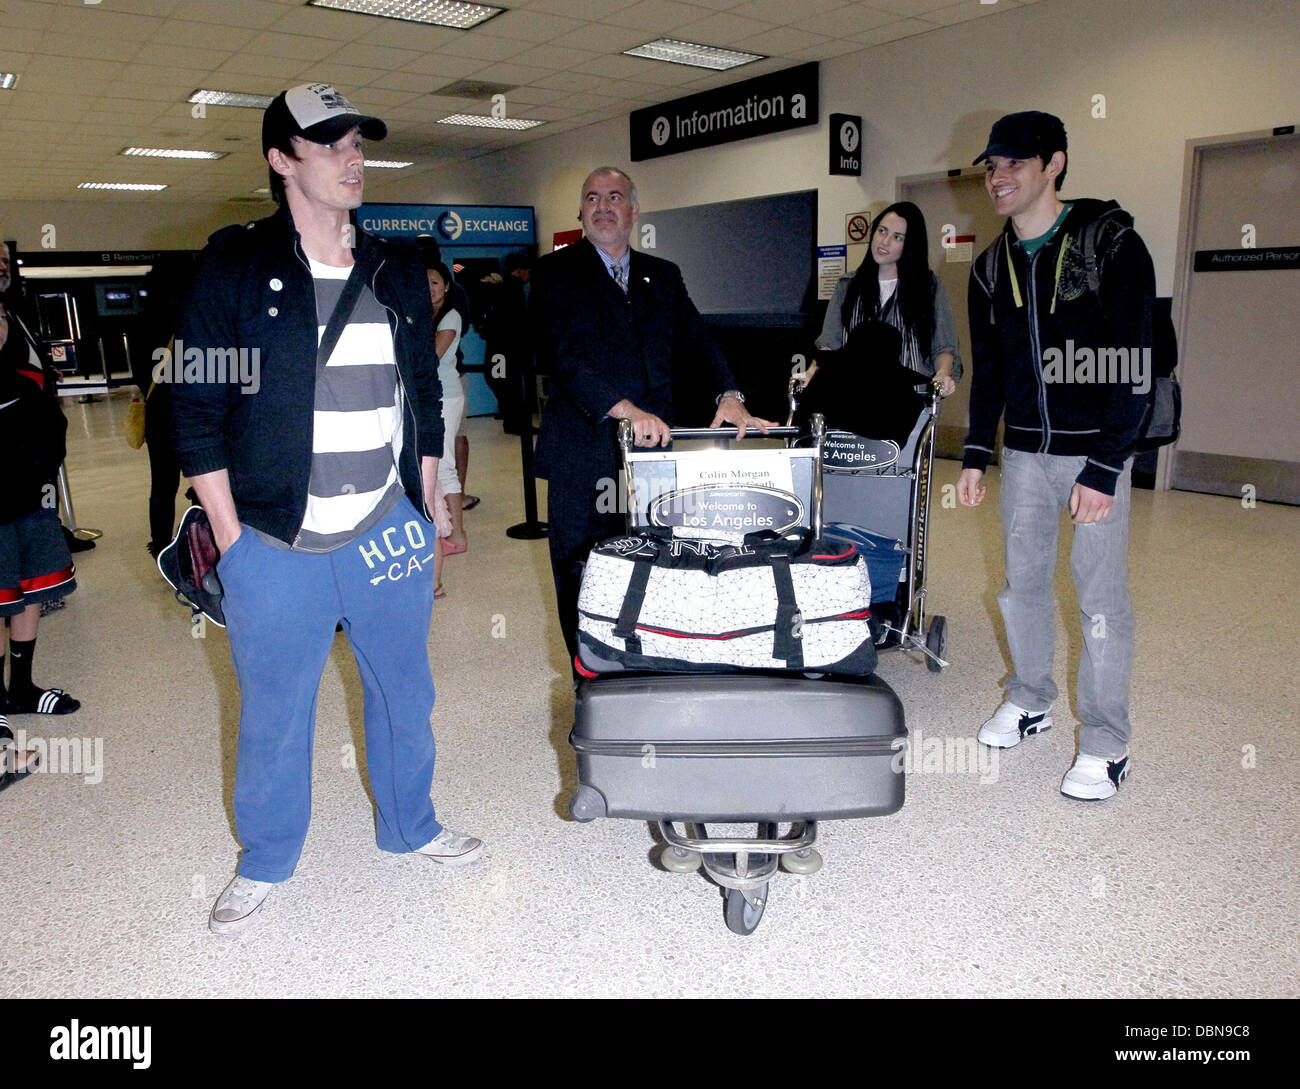 Bradley James, Katie McGrath and Colin Morgan The stars of international smash hit BBC television show 'Merlin' arrive at LAX on a flight from London Heathrow which was delayed over 4 hours from its scheduled arrival time. Los Angeles, California - 24.07. Stock Photo